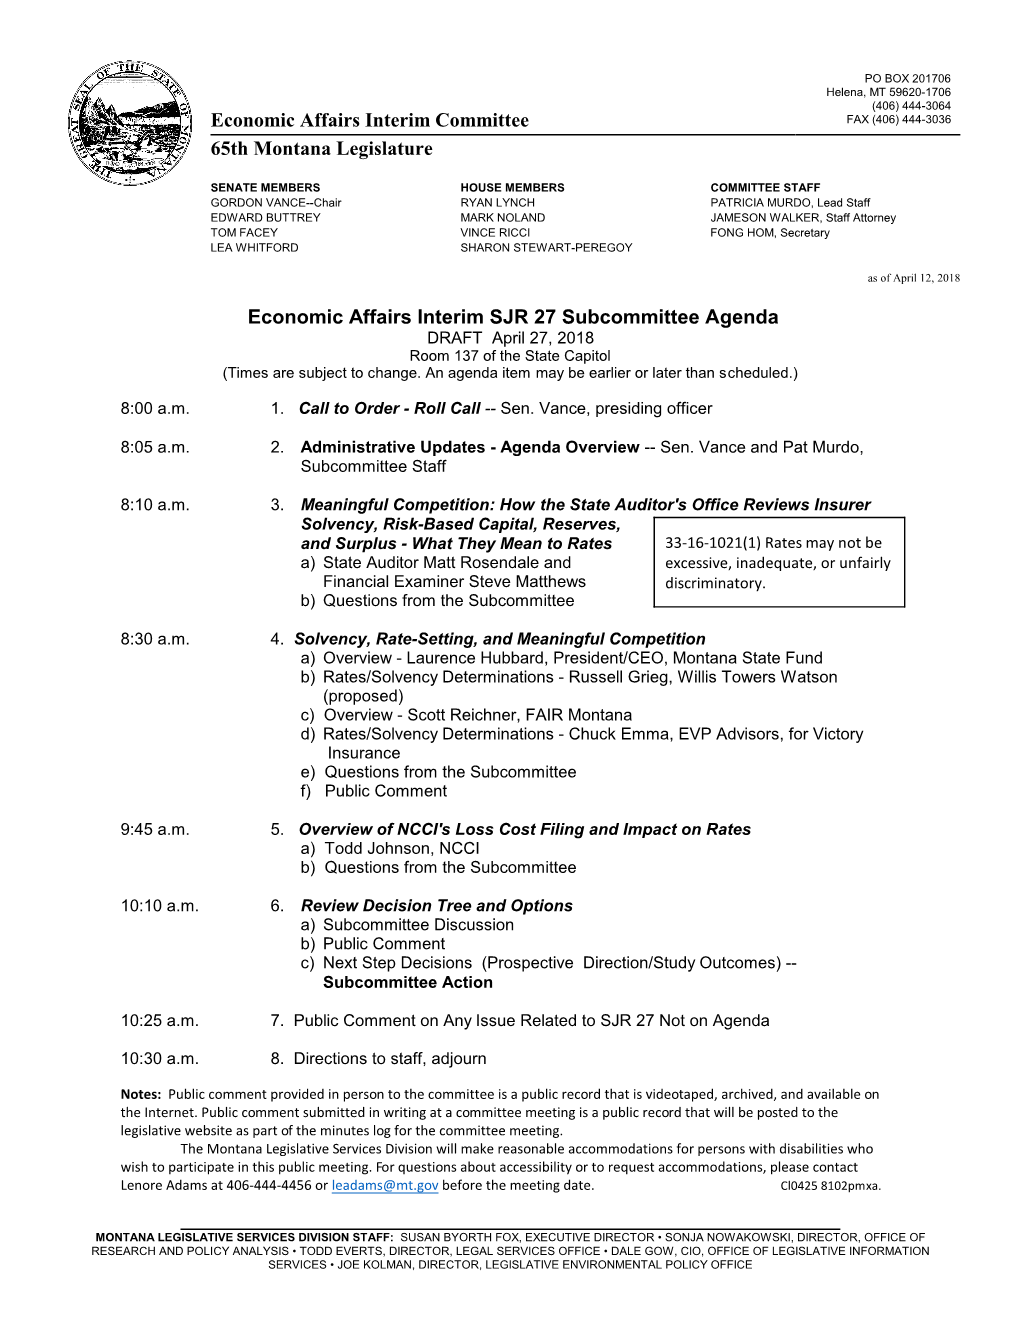 Agenda DRAFT April 27, 2018 Room 137 of the State Capitol (Times Are Subject to Change